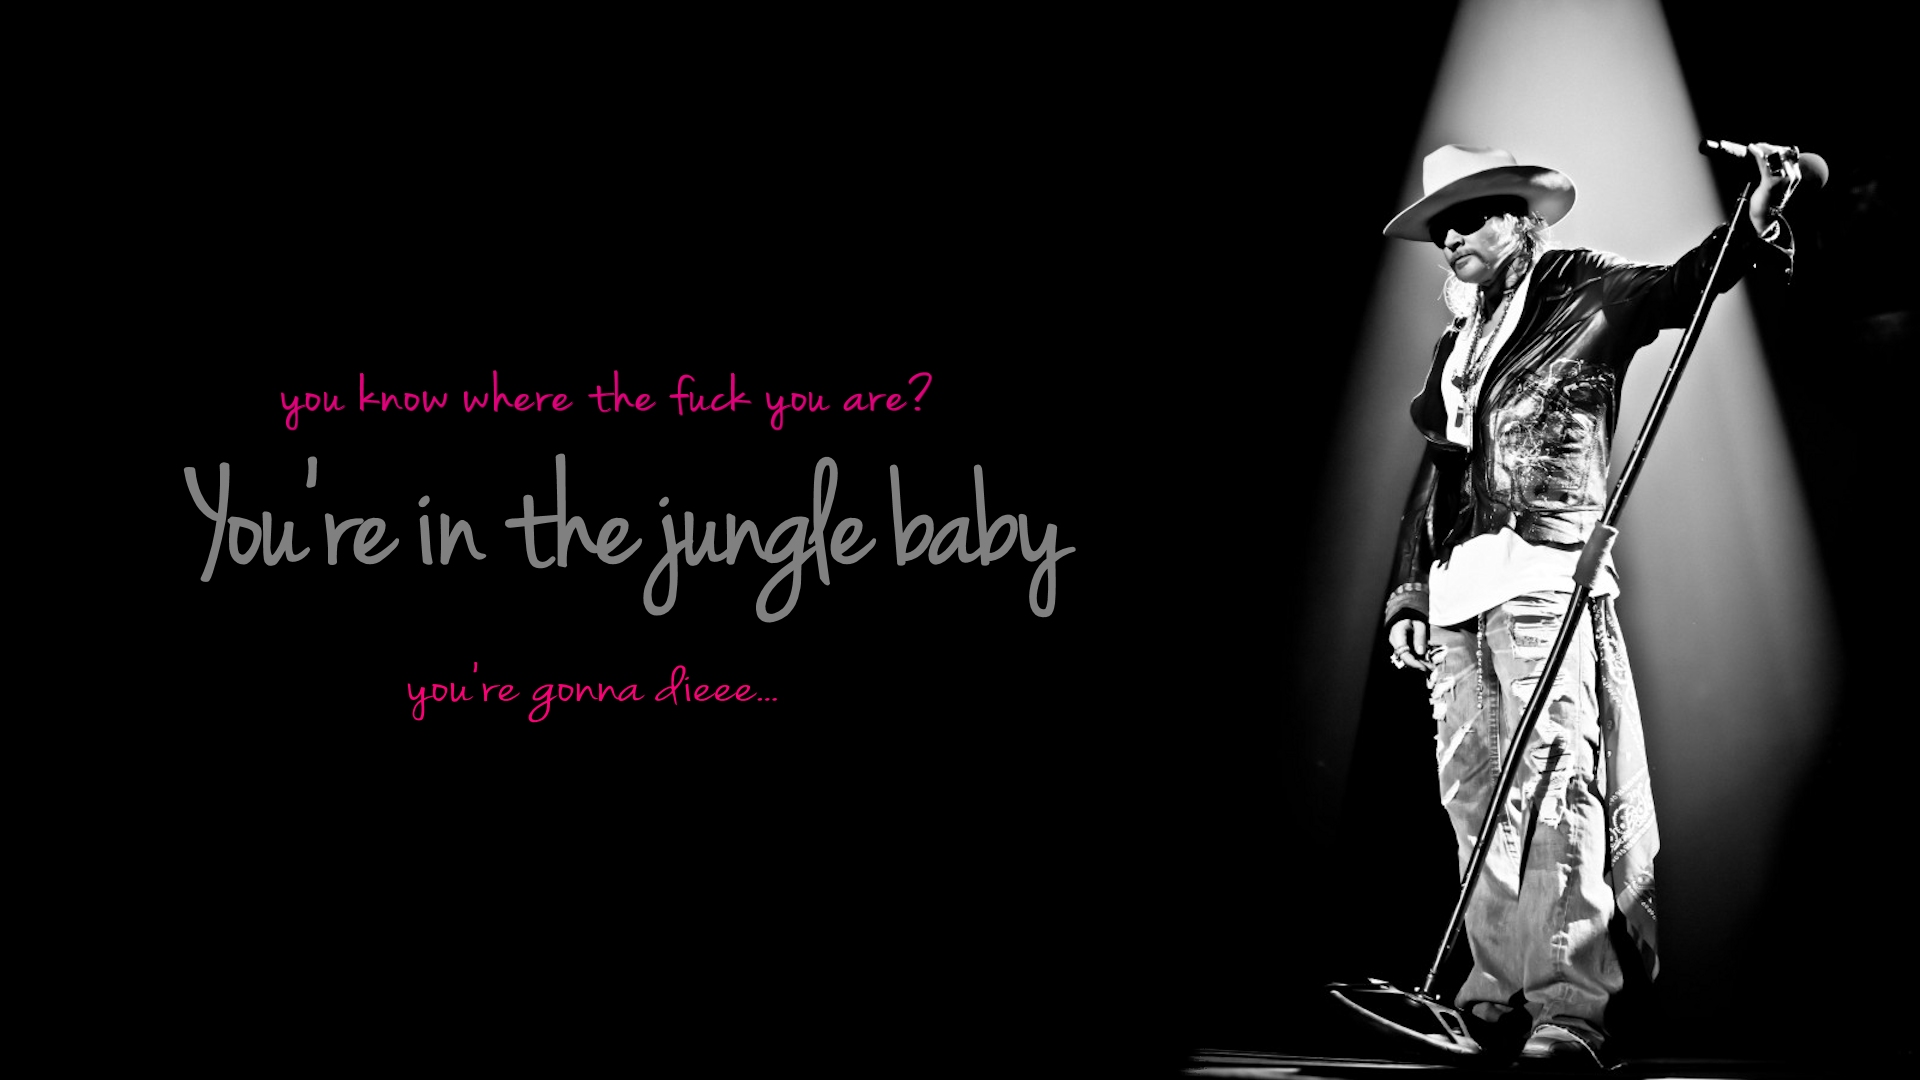 Axl Rose Image Wele To The Jungle HD Wallpaper And